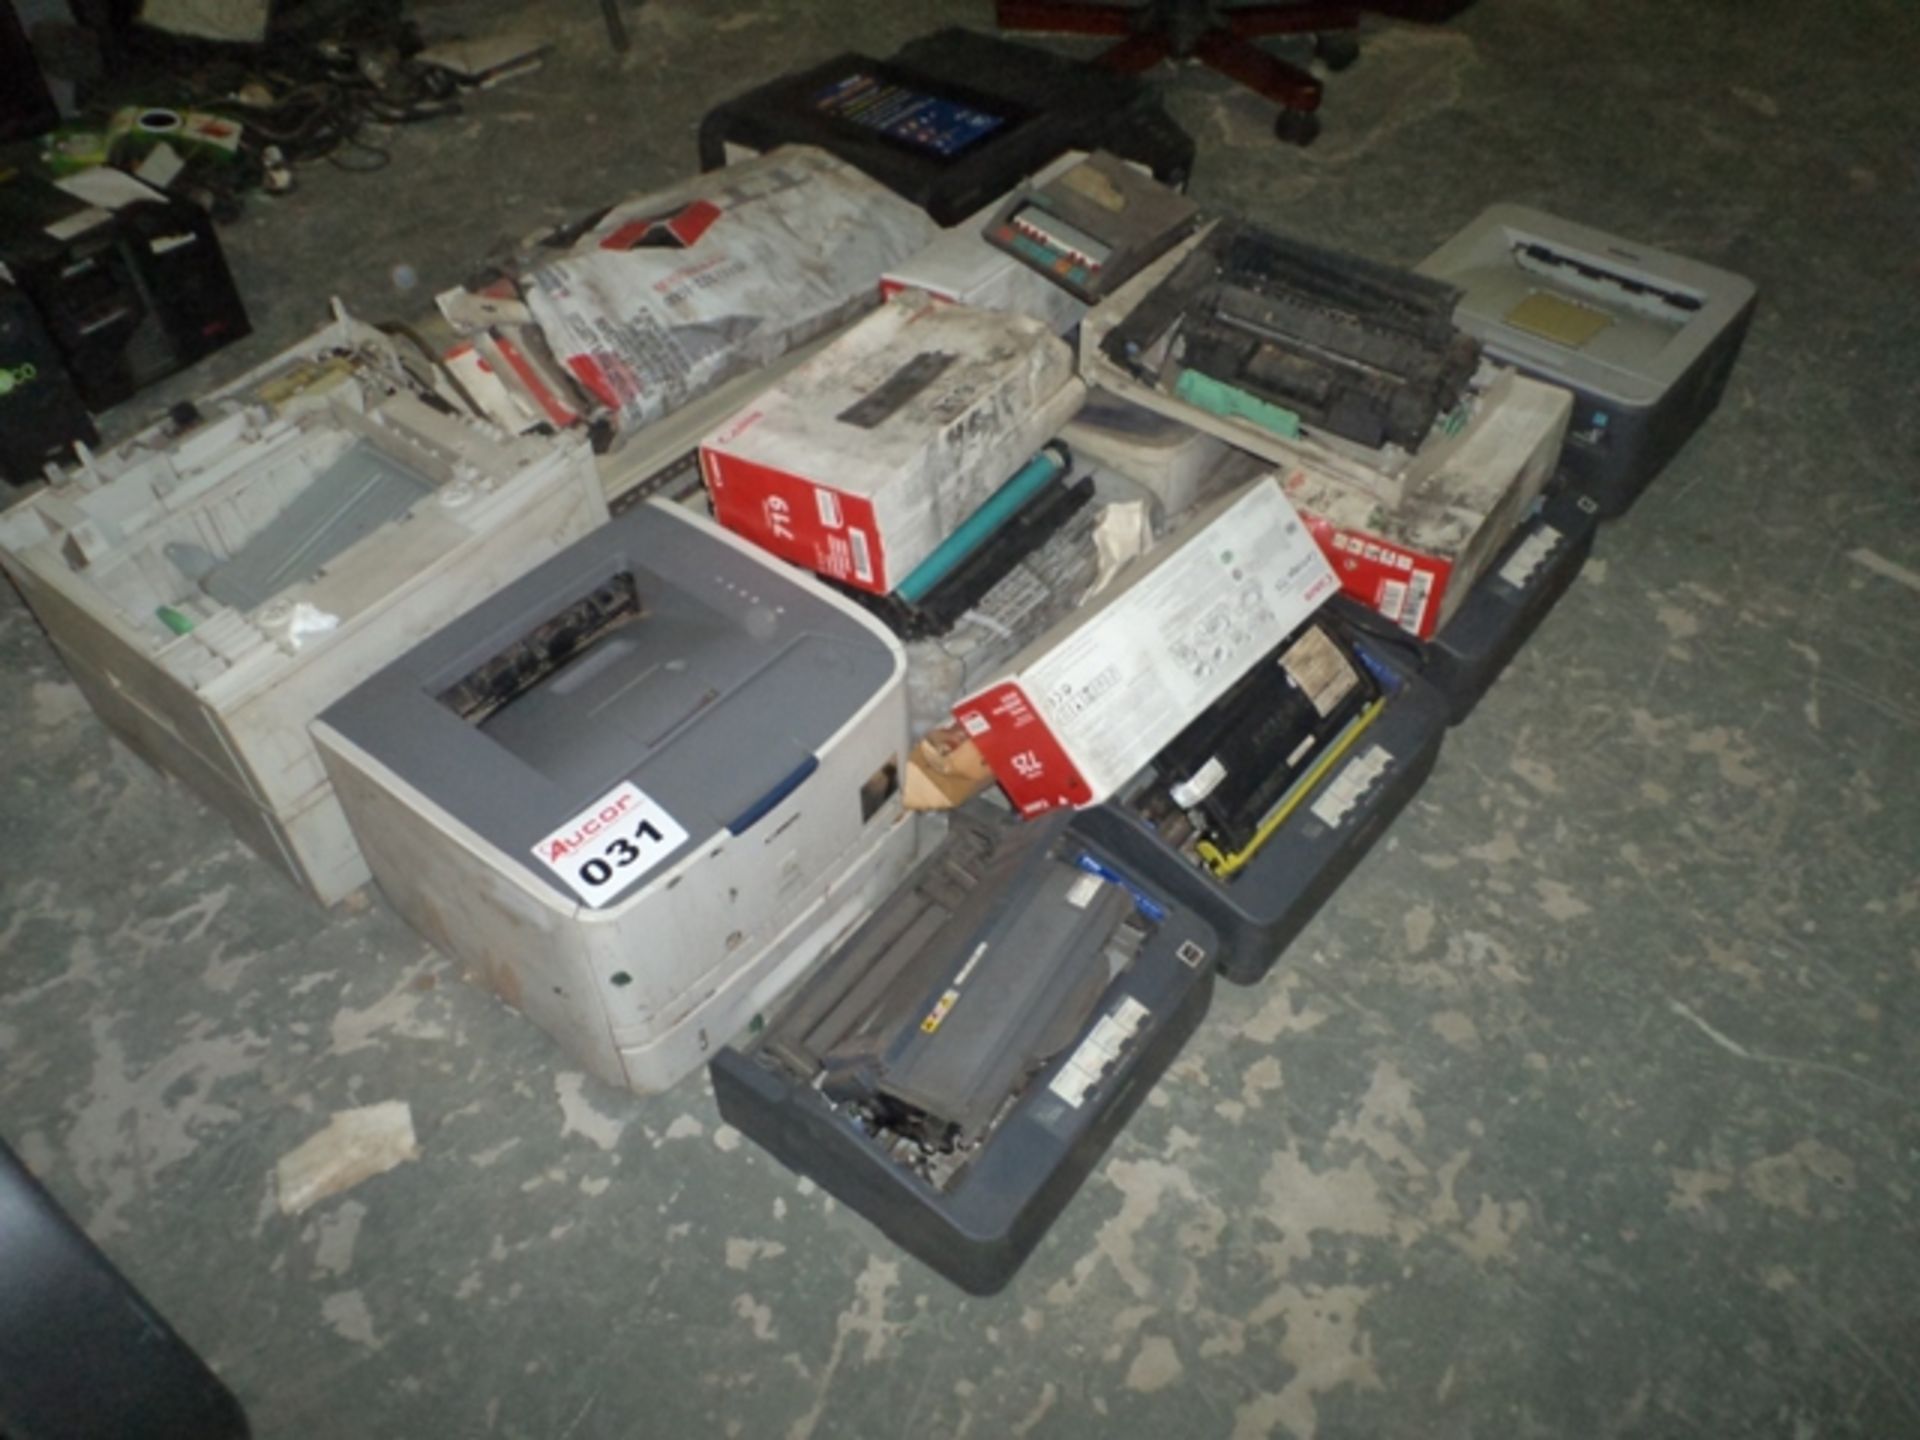 LOT ASSORTED PRINTERS INCLUDING CANON, EPSON AND BROTHER   (1 KRUGER AVE, ESTOIRE, BLOEMFONTEIN)